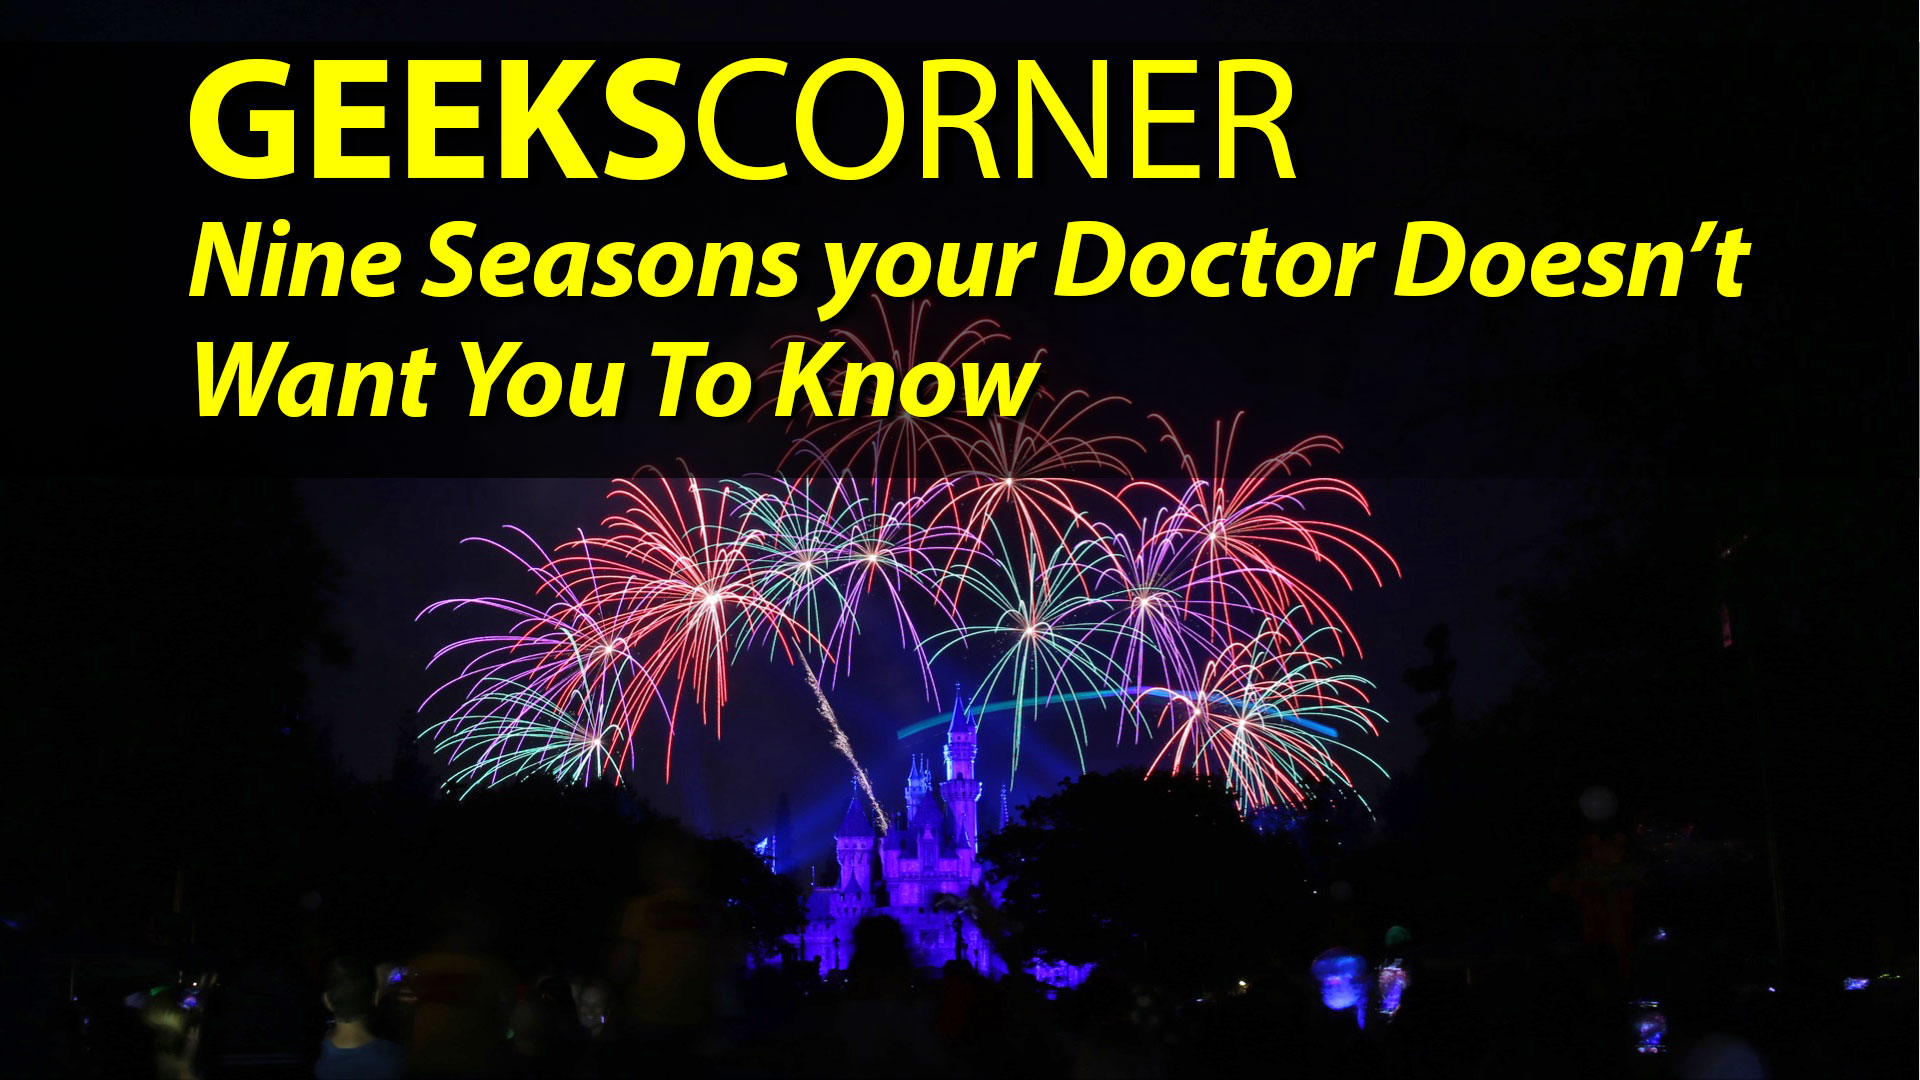 Nine Seasons Your Doctor Doesn’t Want You To Know - GEEKS CORNER - Episode 901